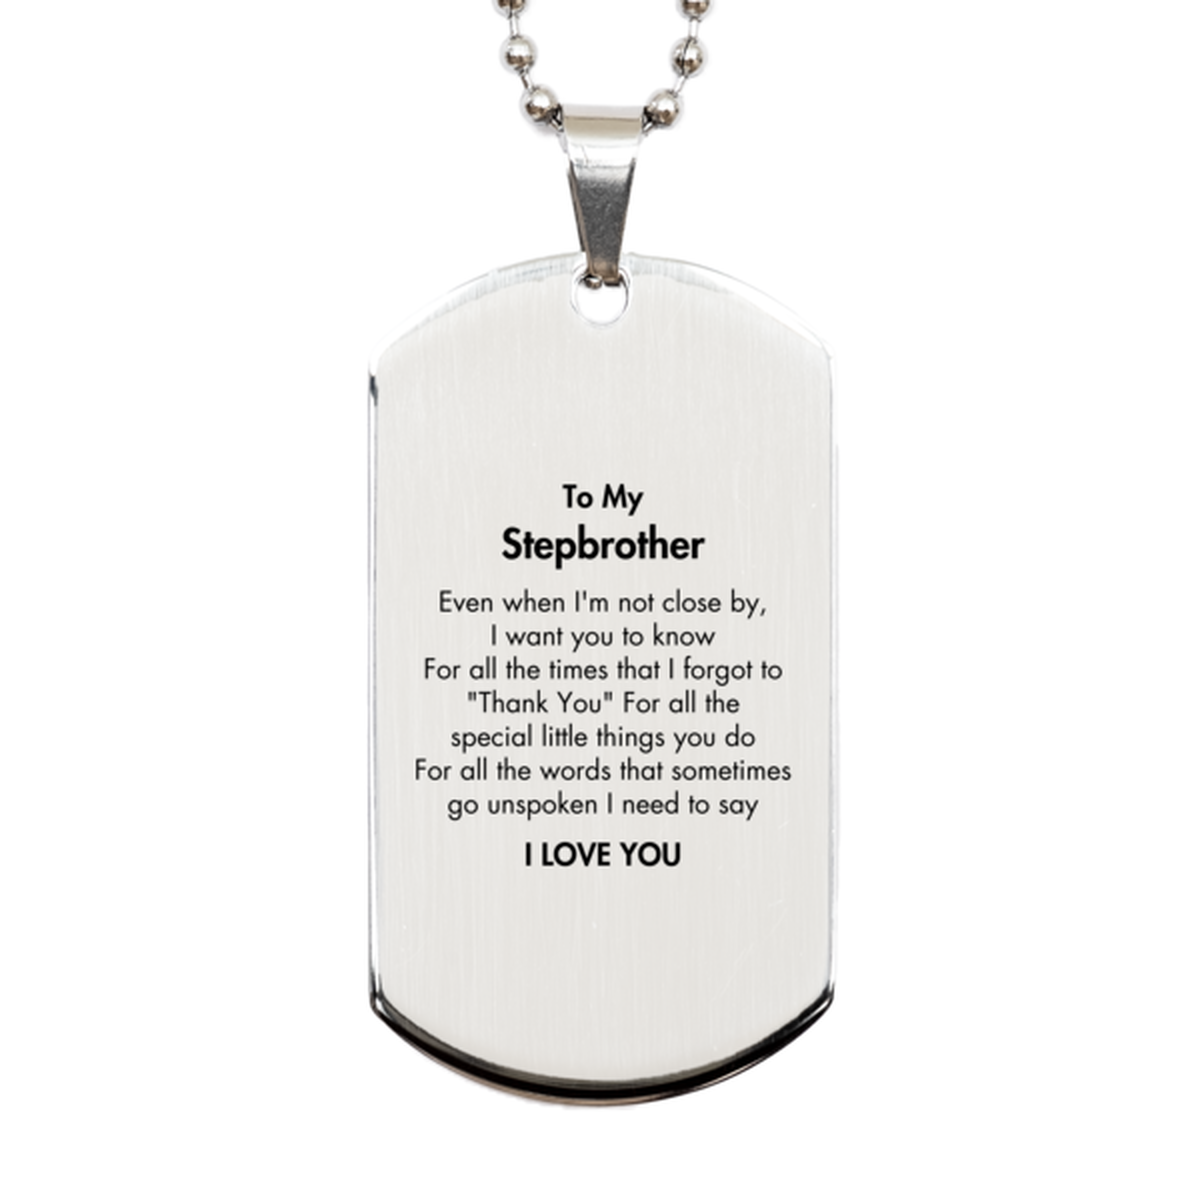 Thank You Gifts for Stepbrother, Keepsake Silver Dog Tag Gifts for Stepbrother Birthday Mother's day Father's Day Stepbrother For all the words That sometimes go unspoken I need to say I LOVE YOU